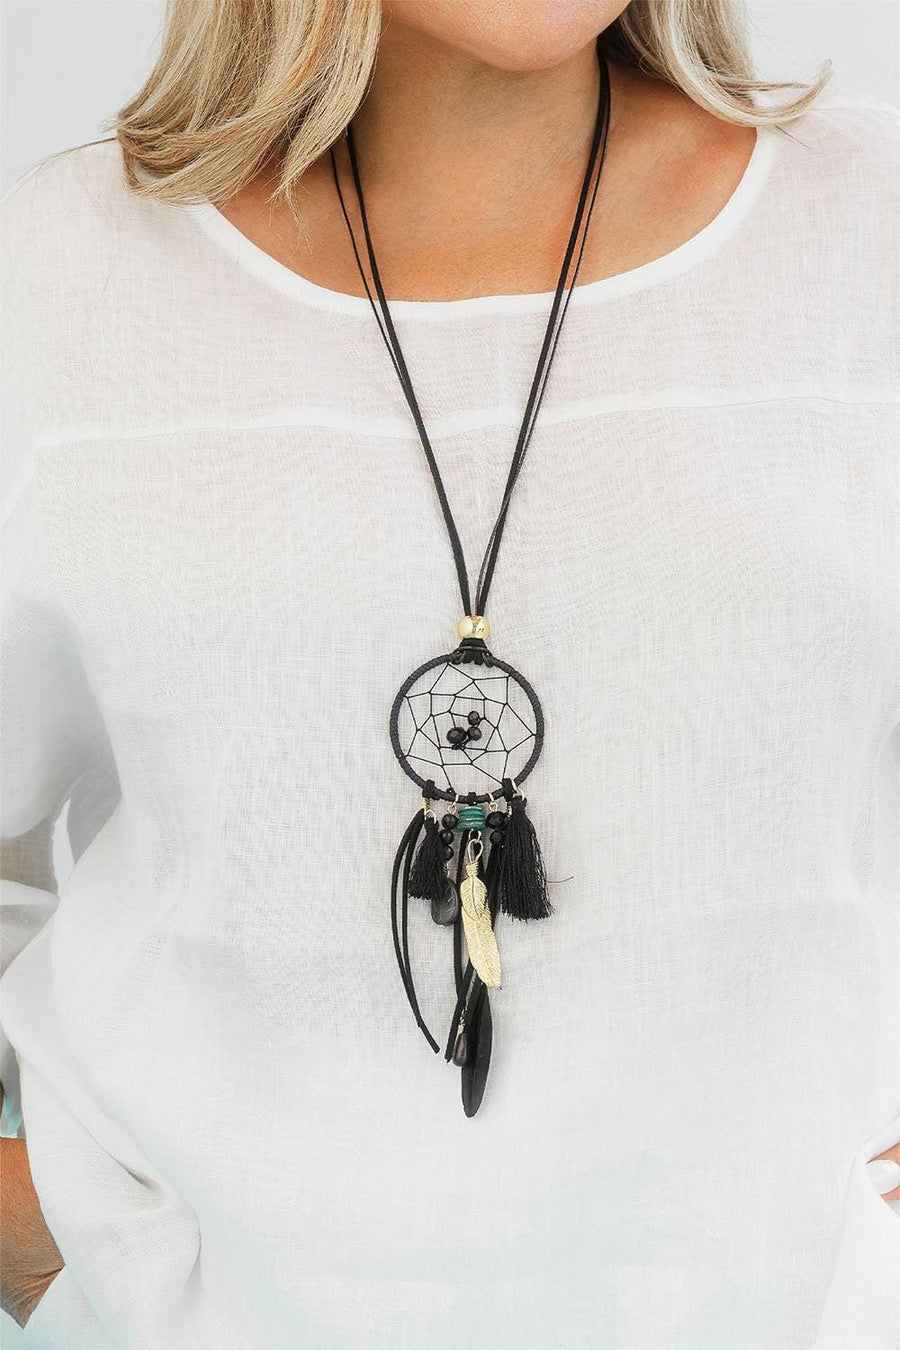 Dream Catcher Faux Suede Necklace With Gold Hardware